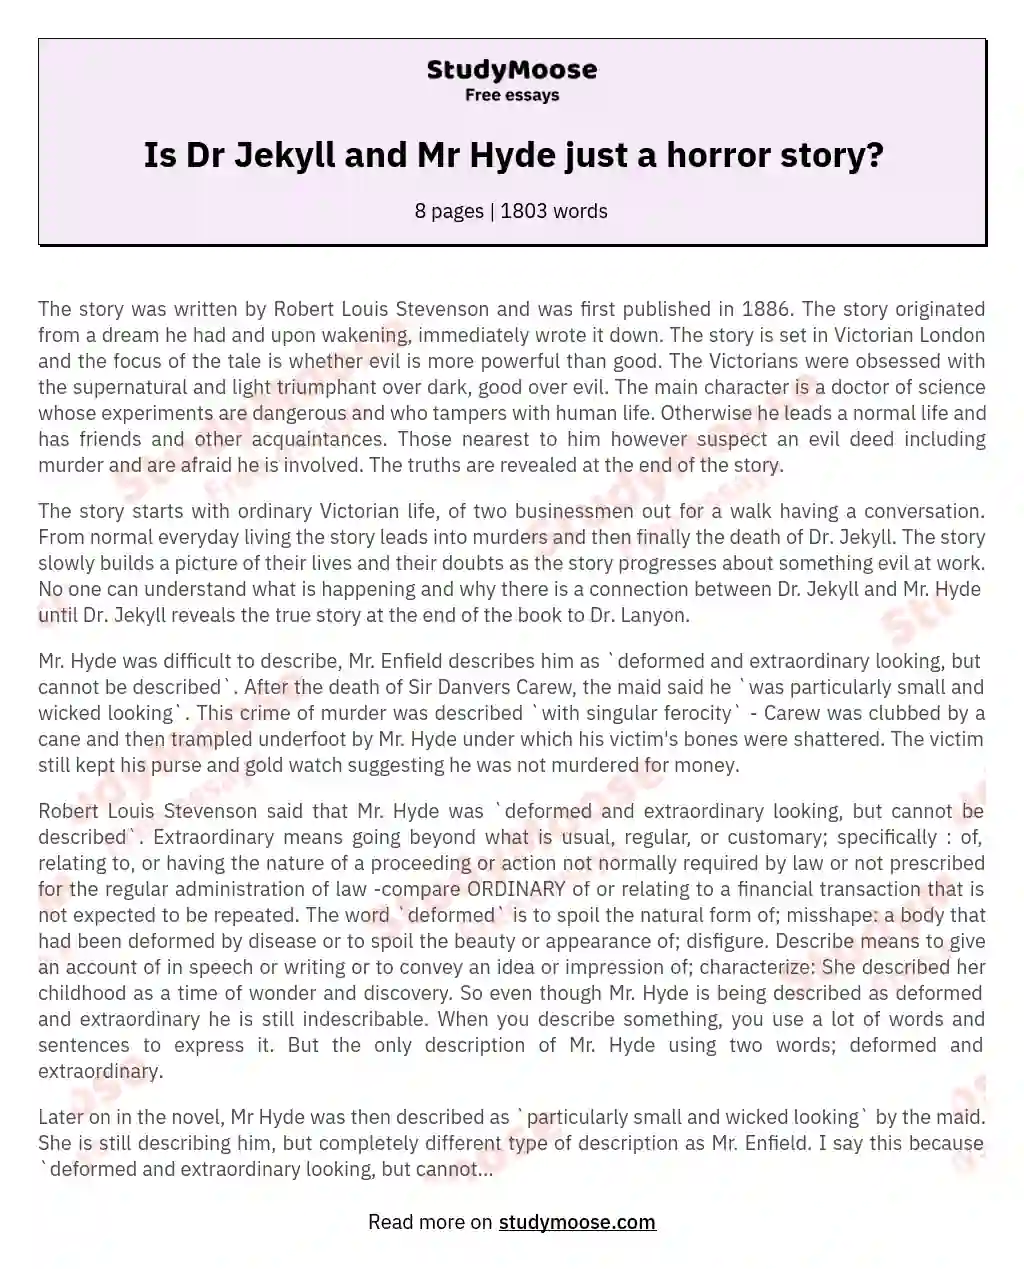 How far is "The Strange Case of Dr. Jekyll and Mr. Hyde" by Robert Louis Stevenson just a horror story?